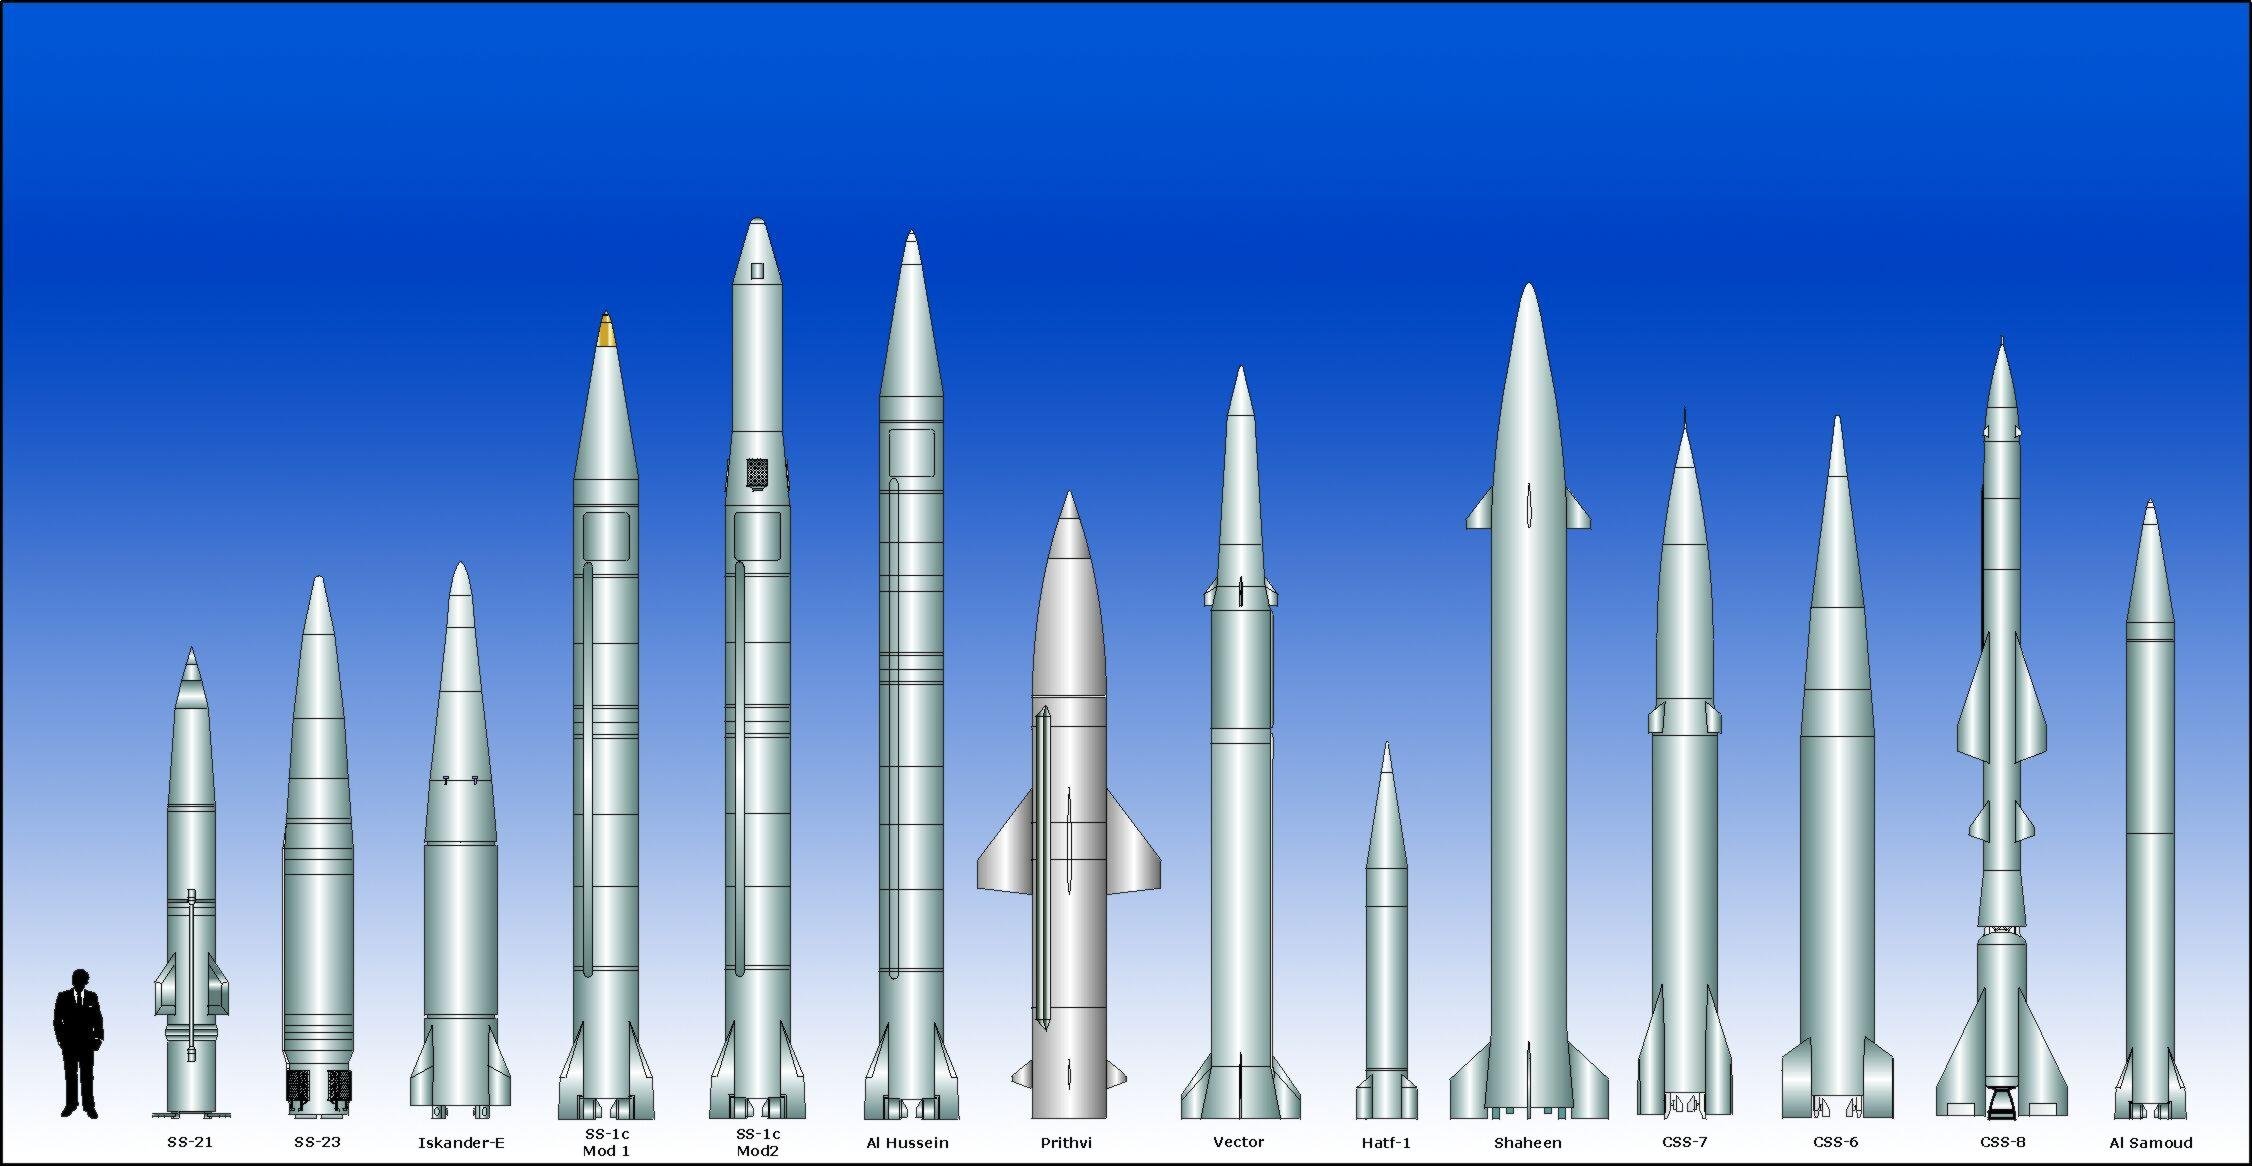 intercontinental, Missile, Ballistic, Weapon, Military, Bomb, Nuclear